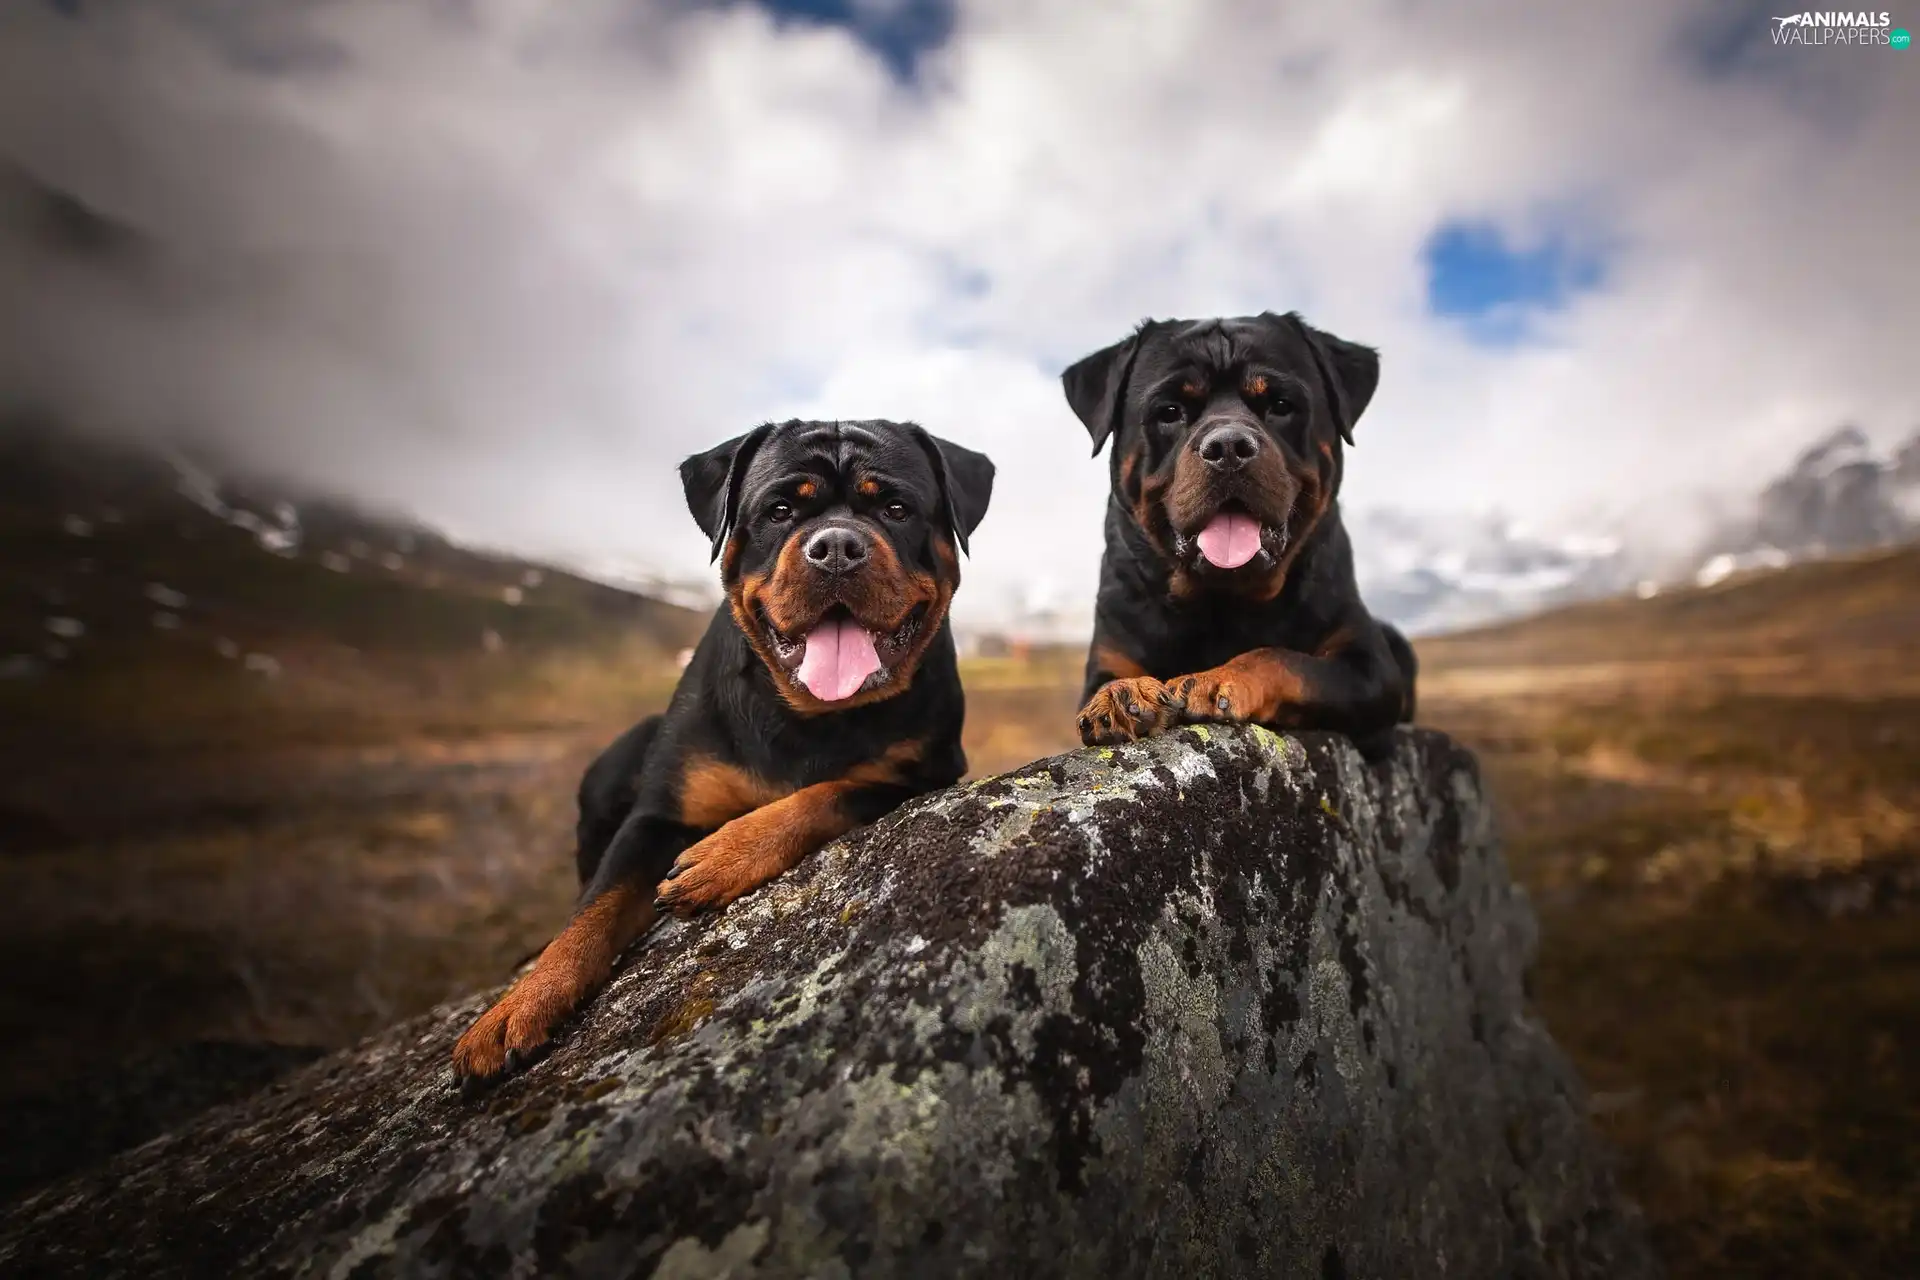 Two cars, Rottweilers, Stone, Dogs